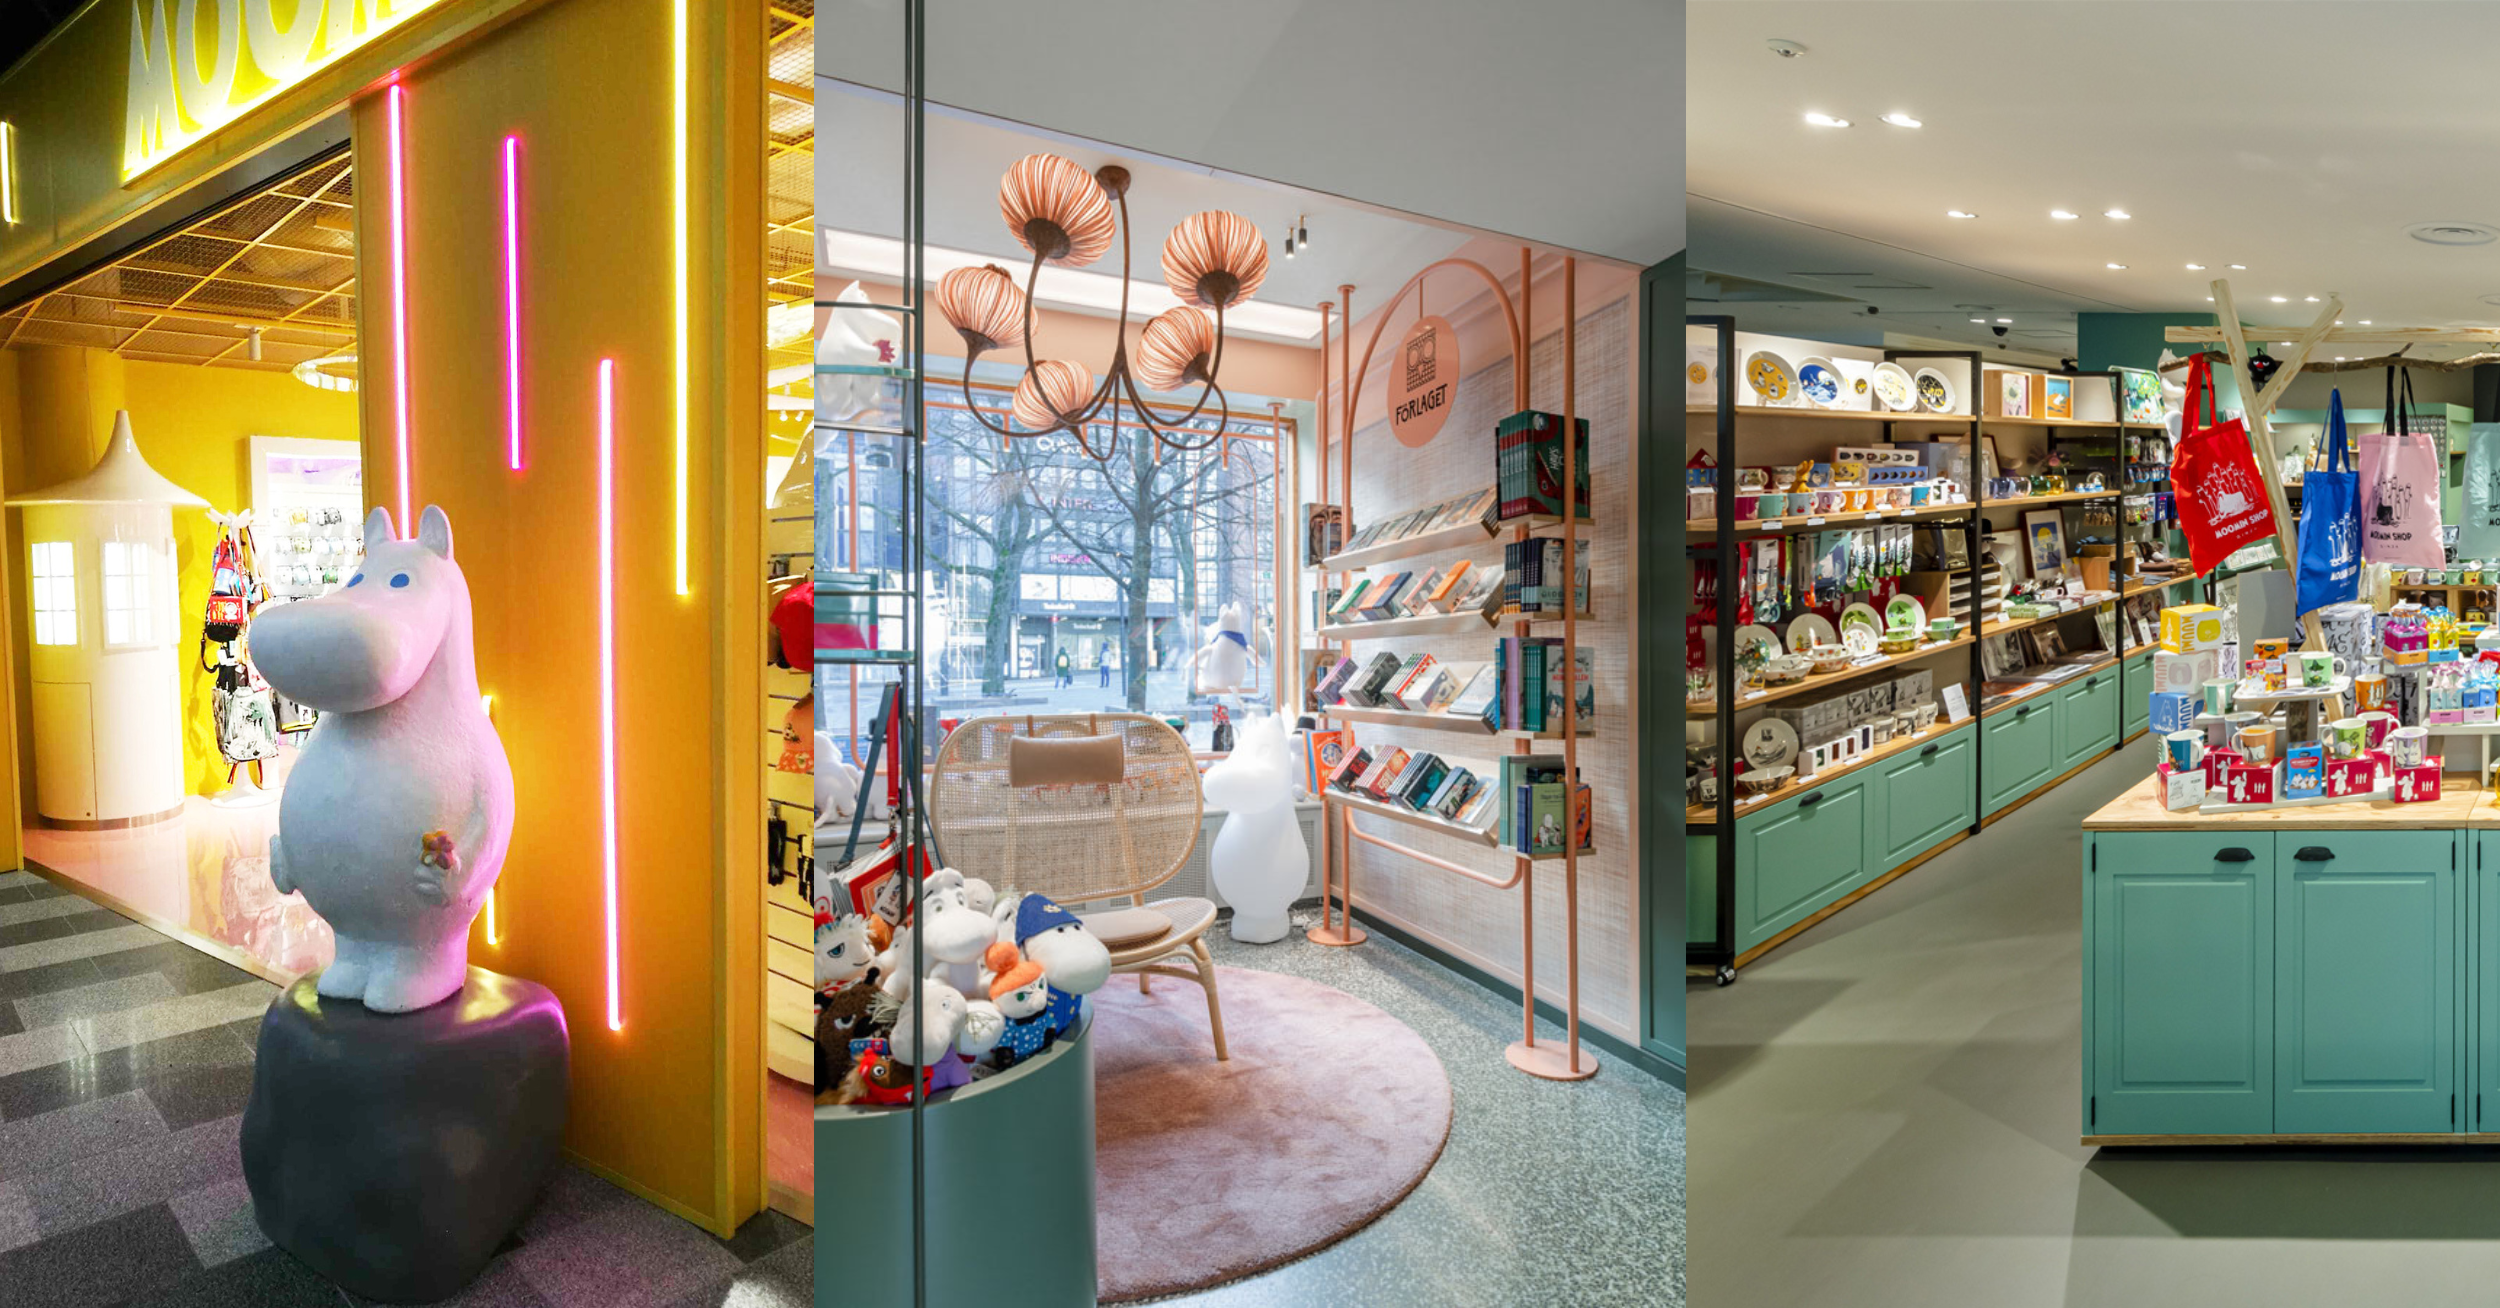 Get to know the Moomin Shops around the world - Blog - Moomin